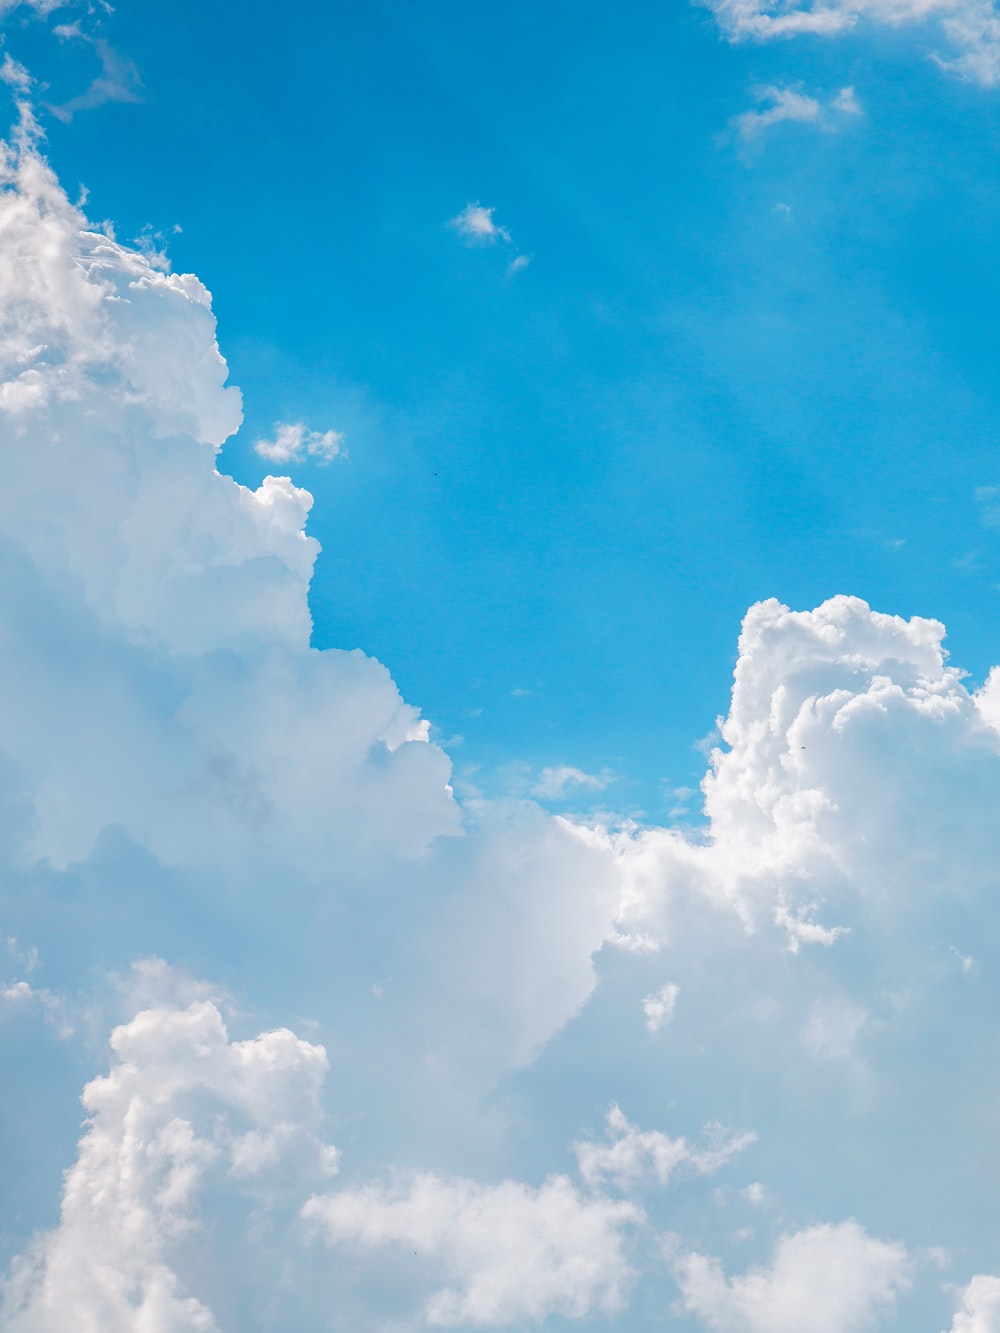 Blue Sky With Cloud Picture. Download Free Image